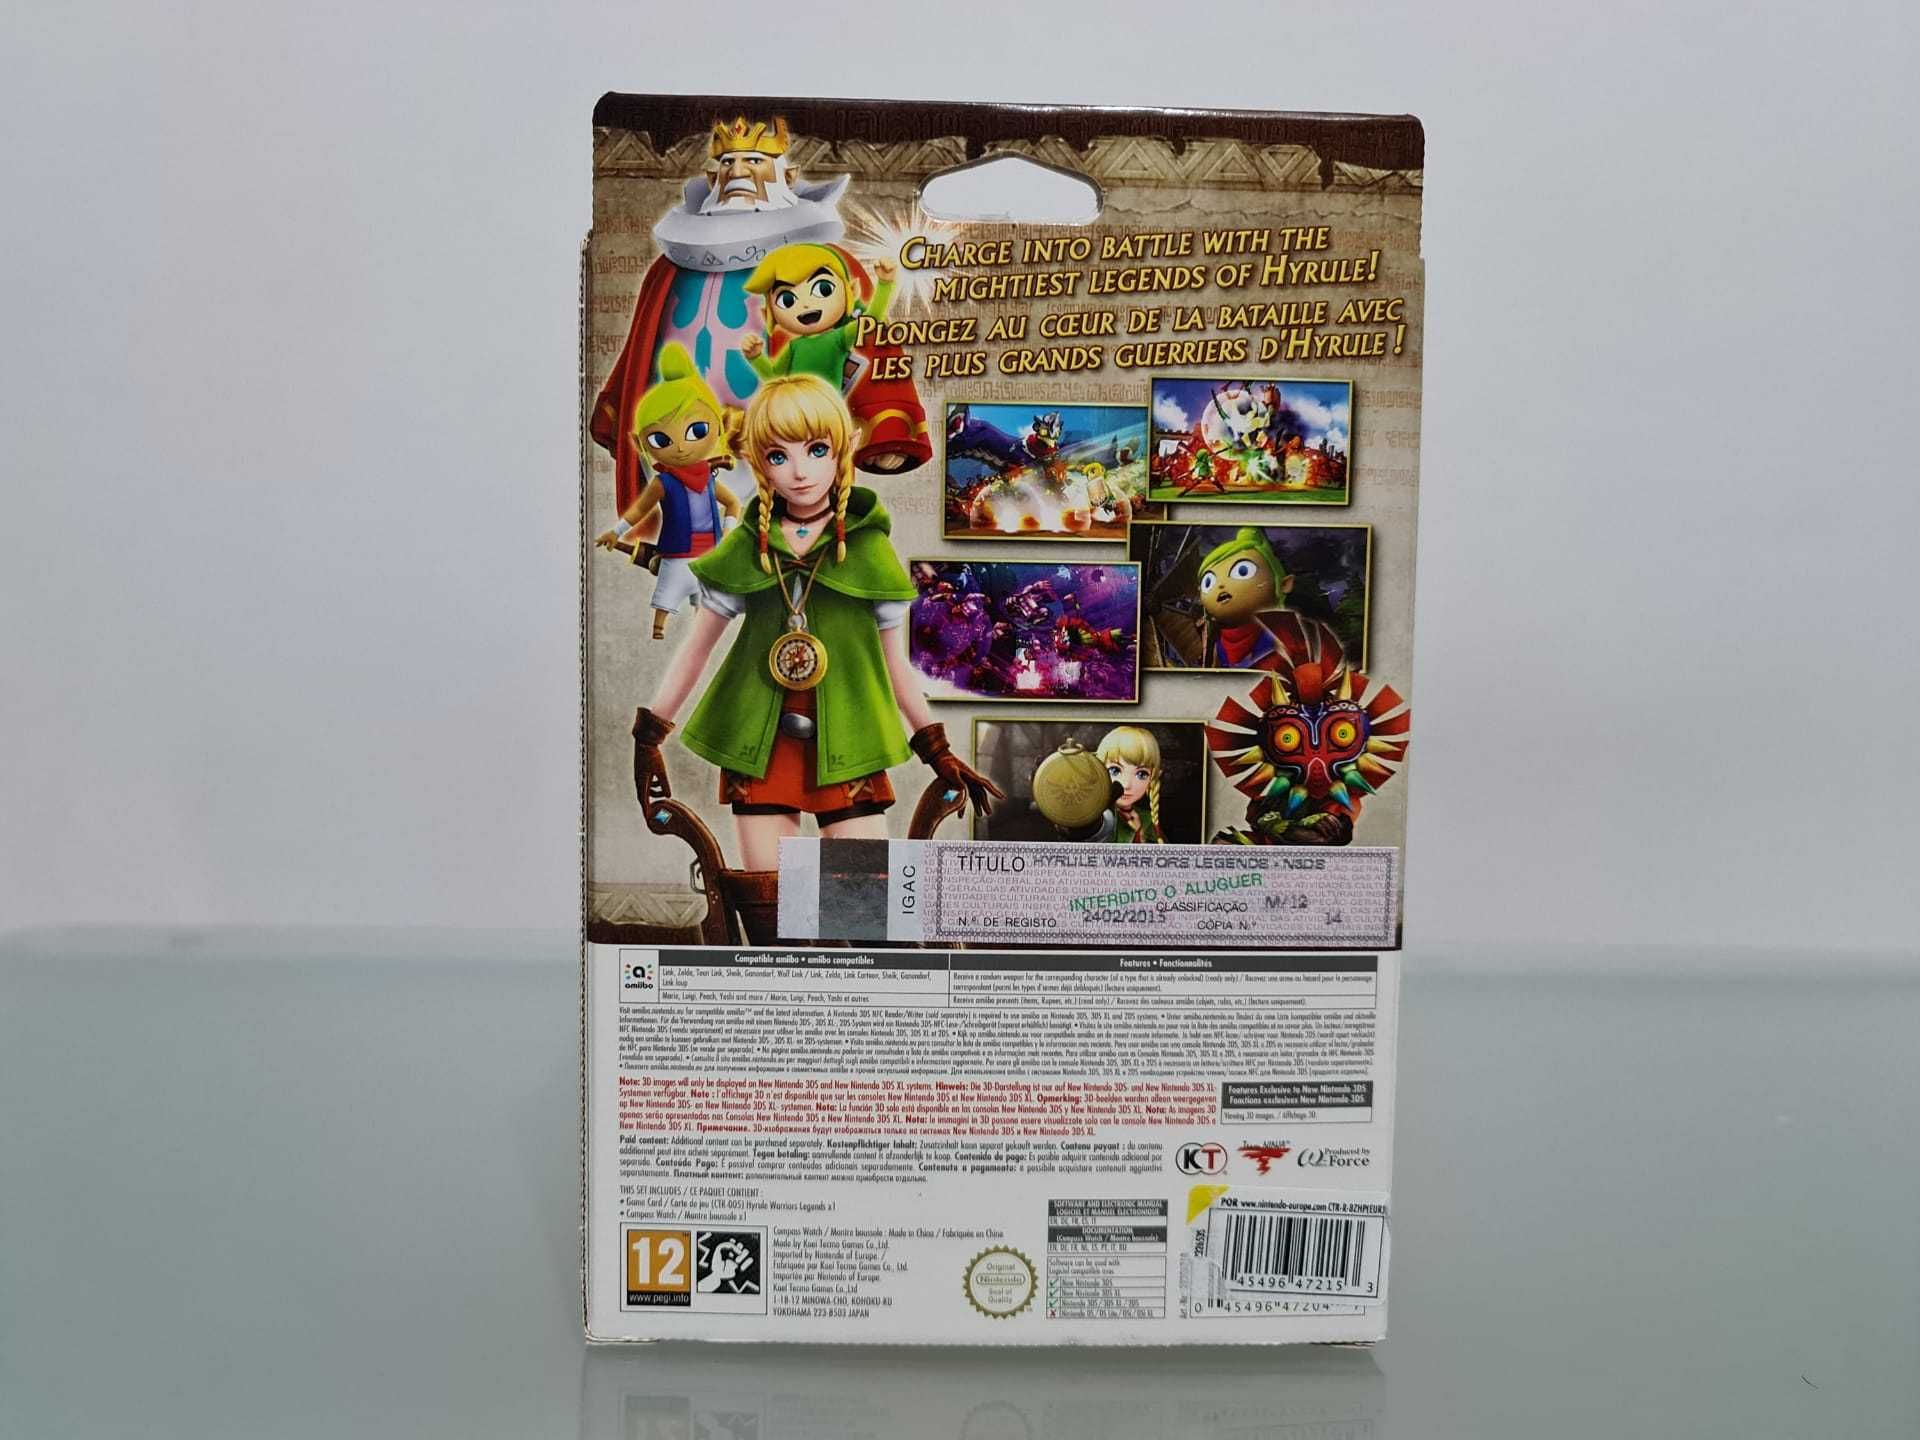 Hyrule Warriors Legends limited edition 3DS